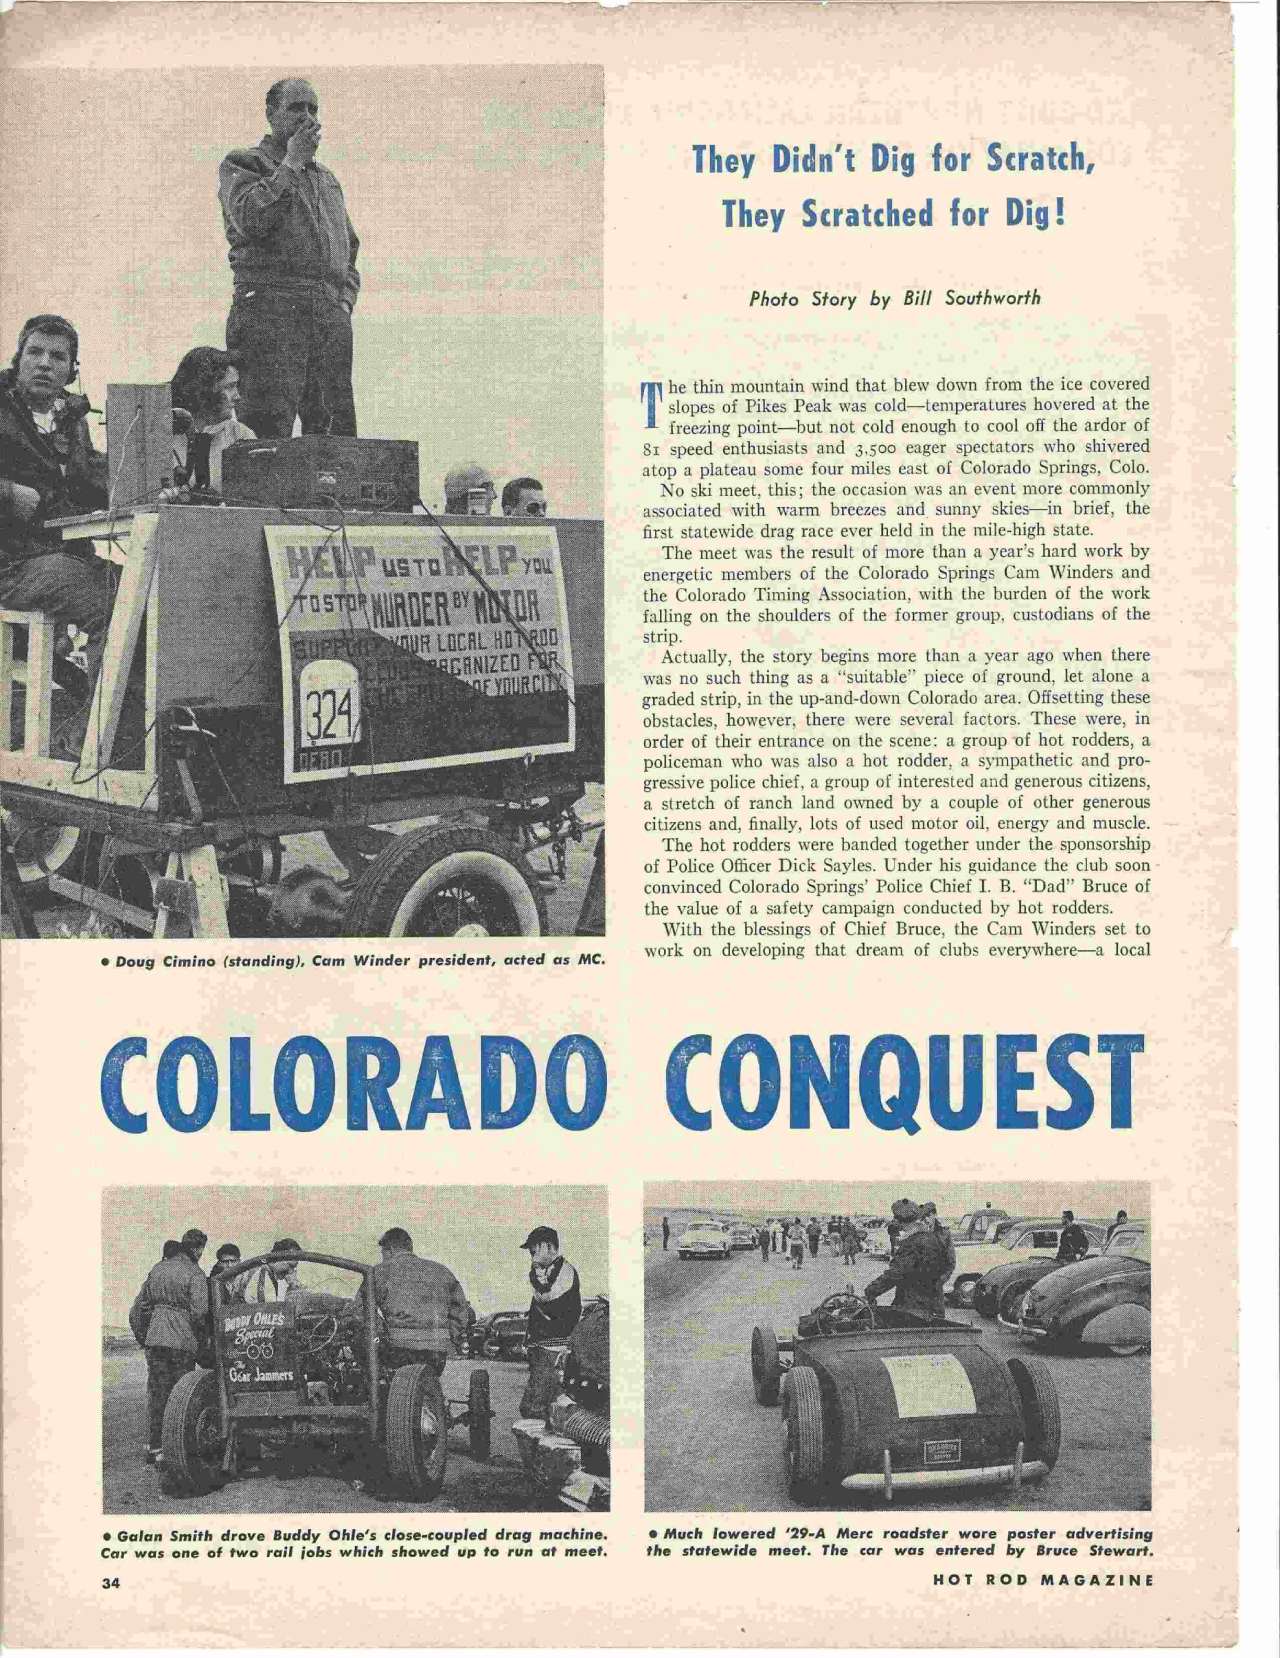 An article on the Colorado Conquest about vehicles